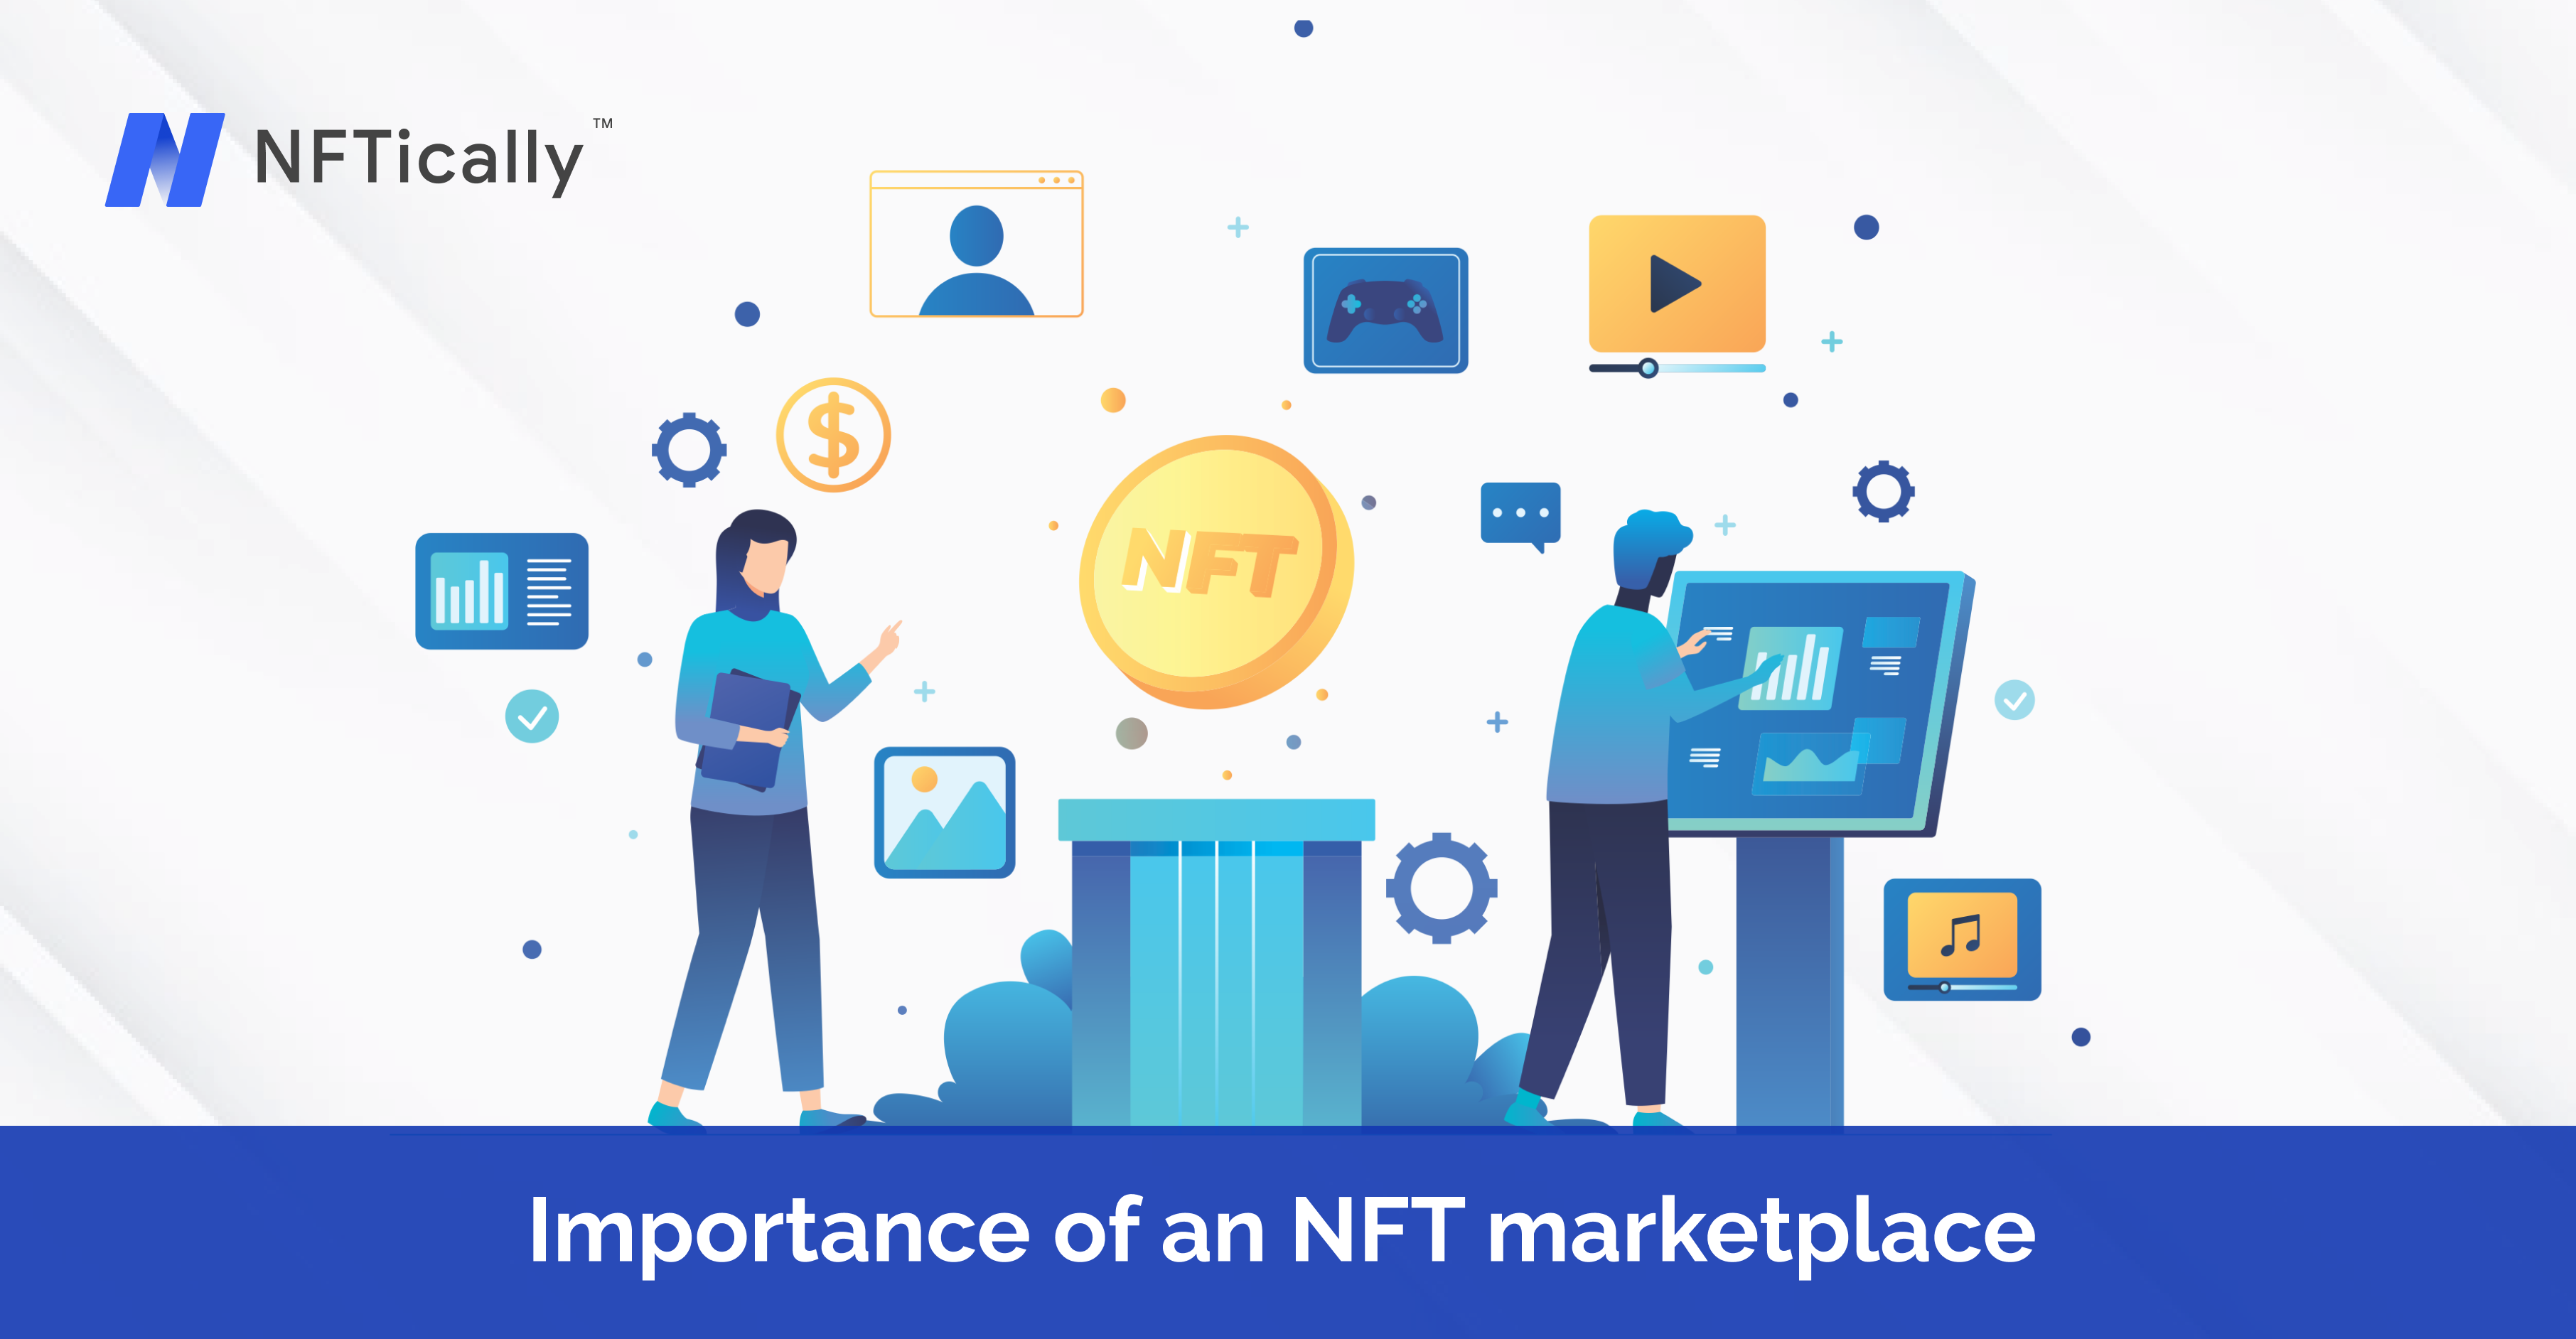 What is the Importance of an NFT marketplace?